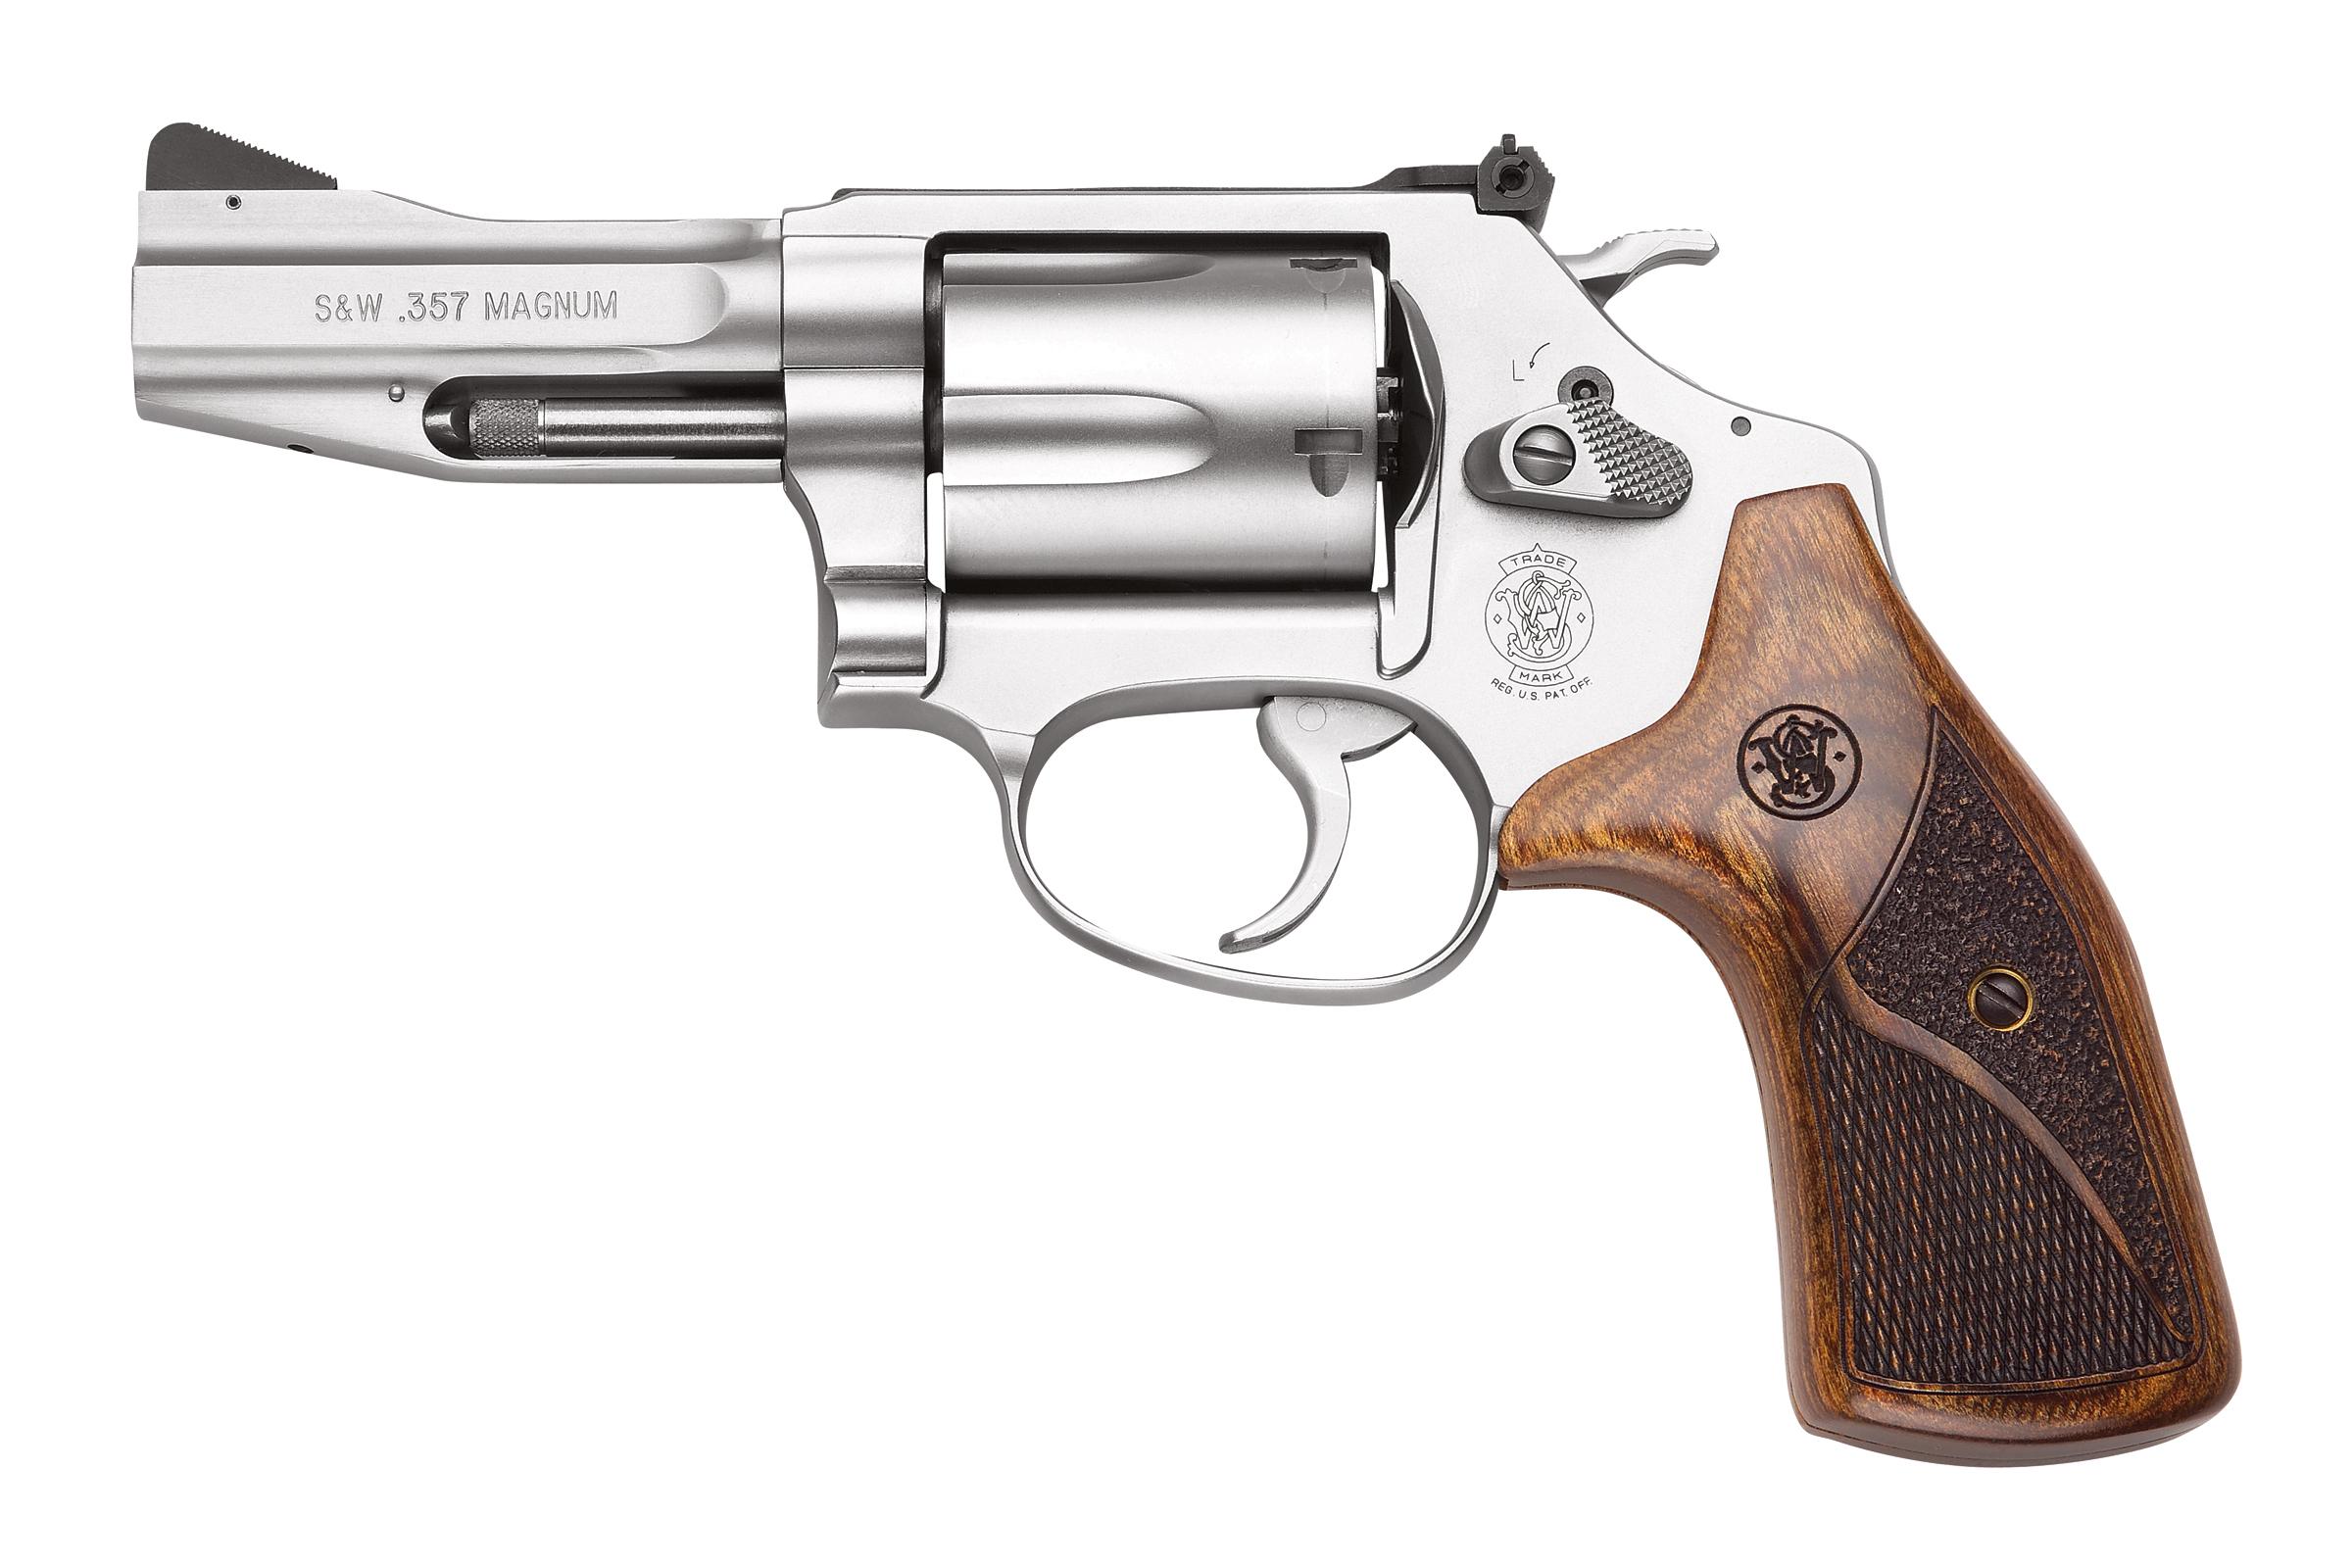  Smith & Wesson Pro 60 3 